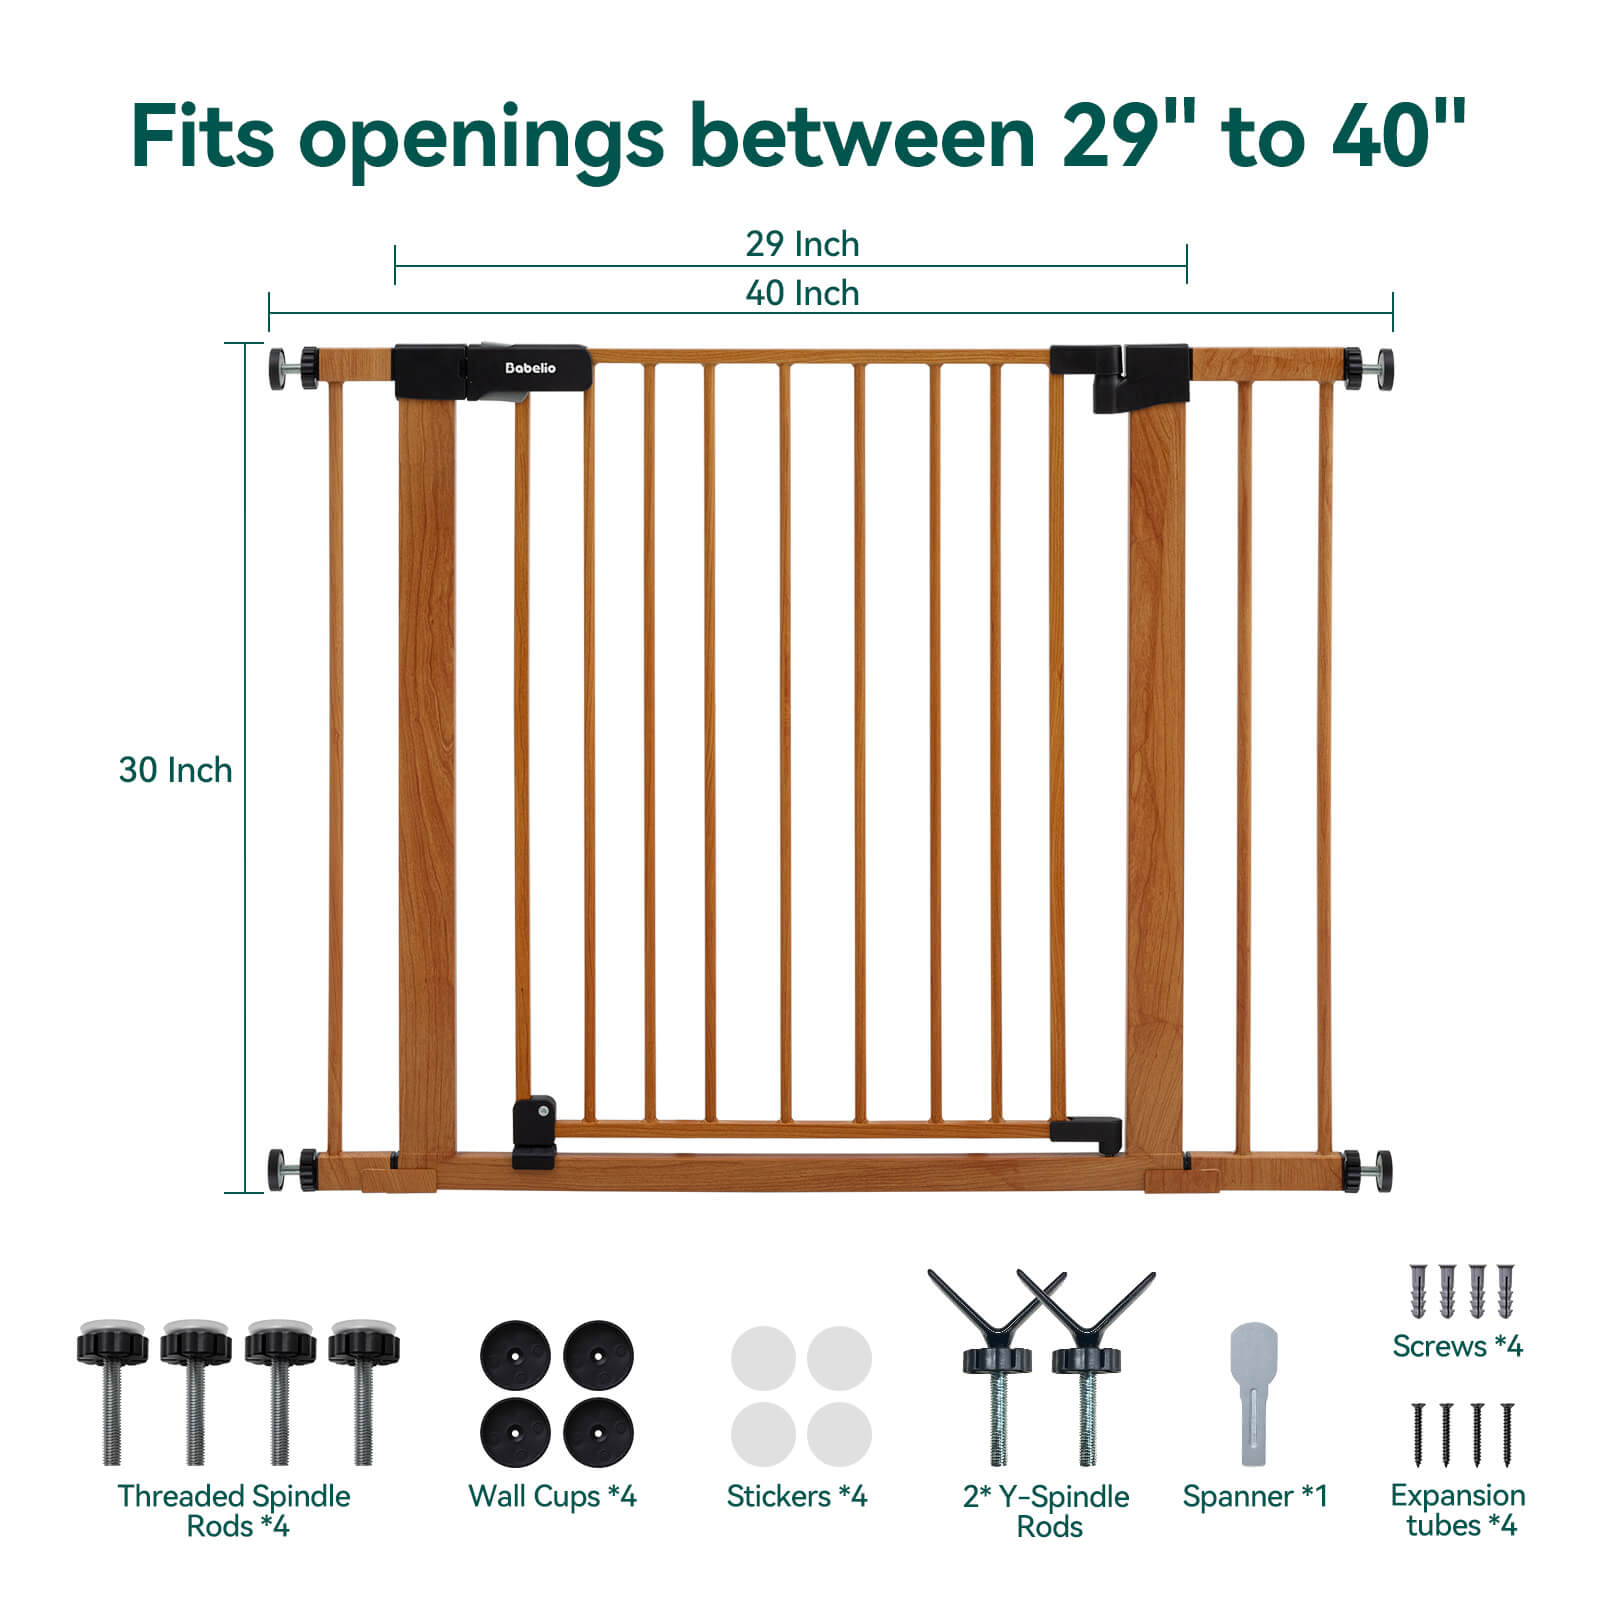 Babelio Adjustable Metal Baby Gate with Wood Pattern – Easy Install, Pressure Mounted, Auto-Close, No Drill